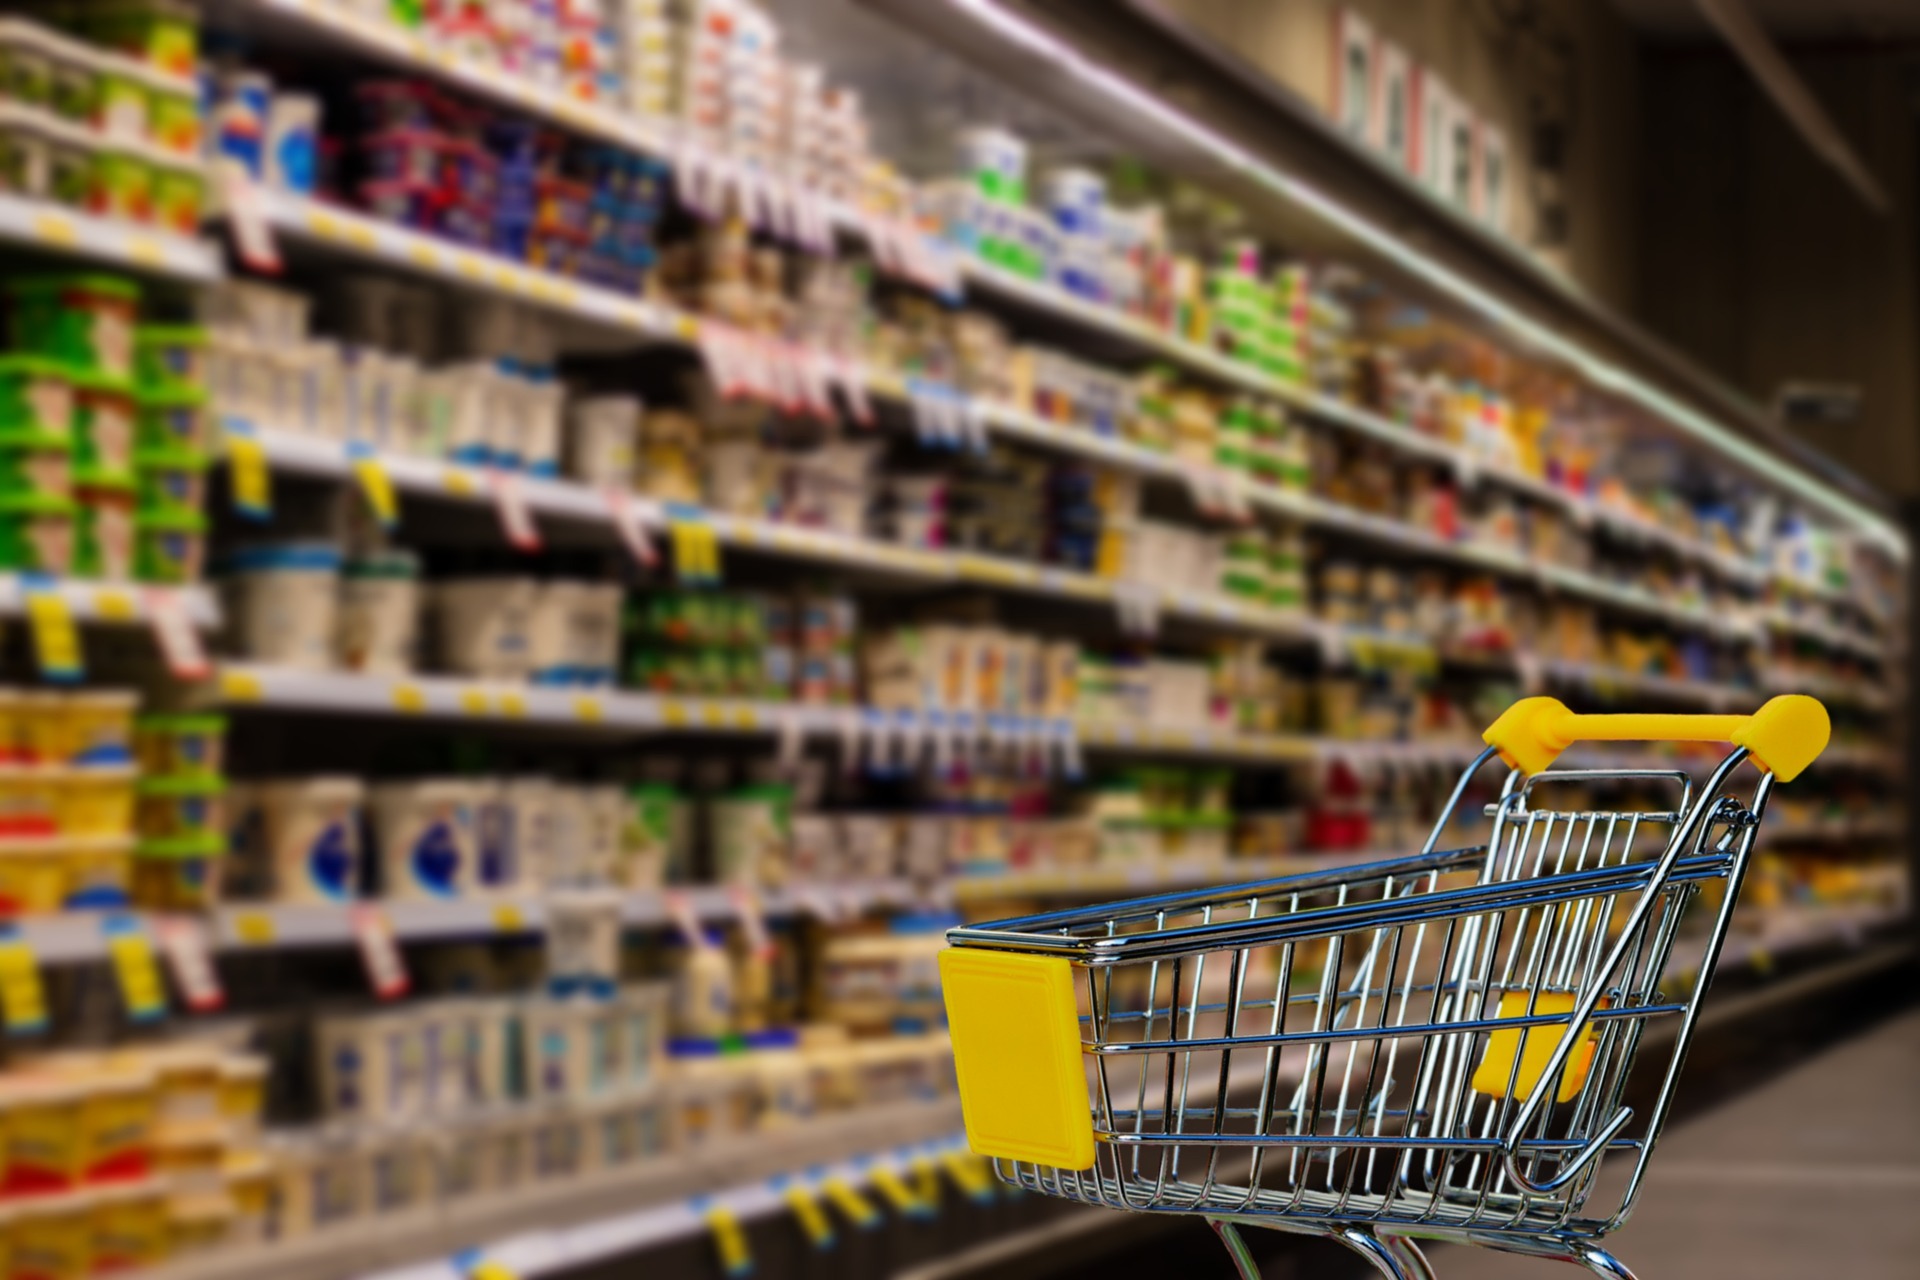 Greek supermarkets: Market grows by 4.6% in the first nine months of 2022 due to inflation